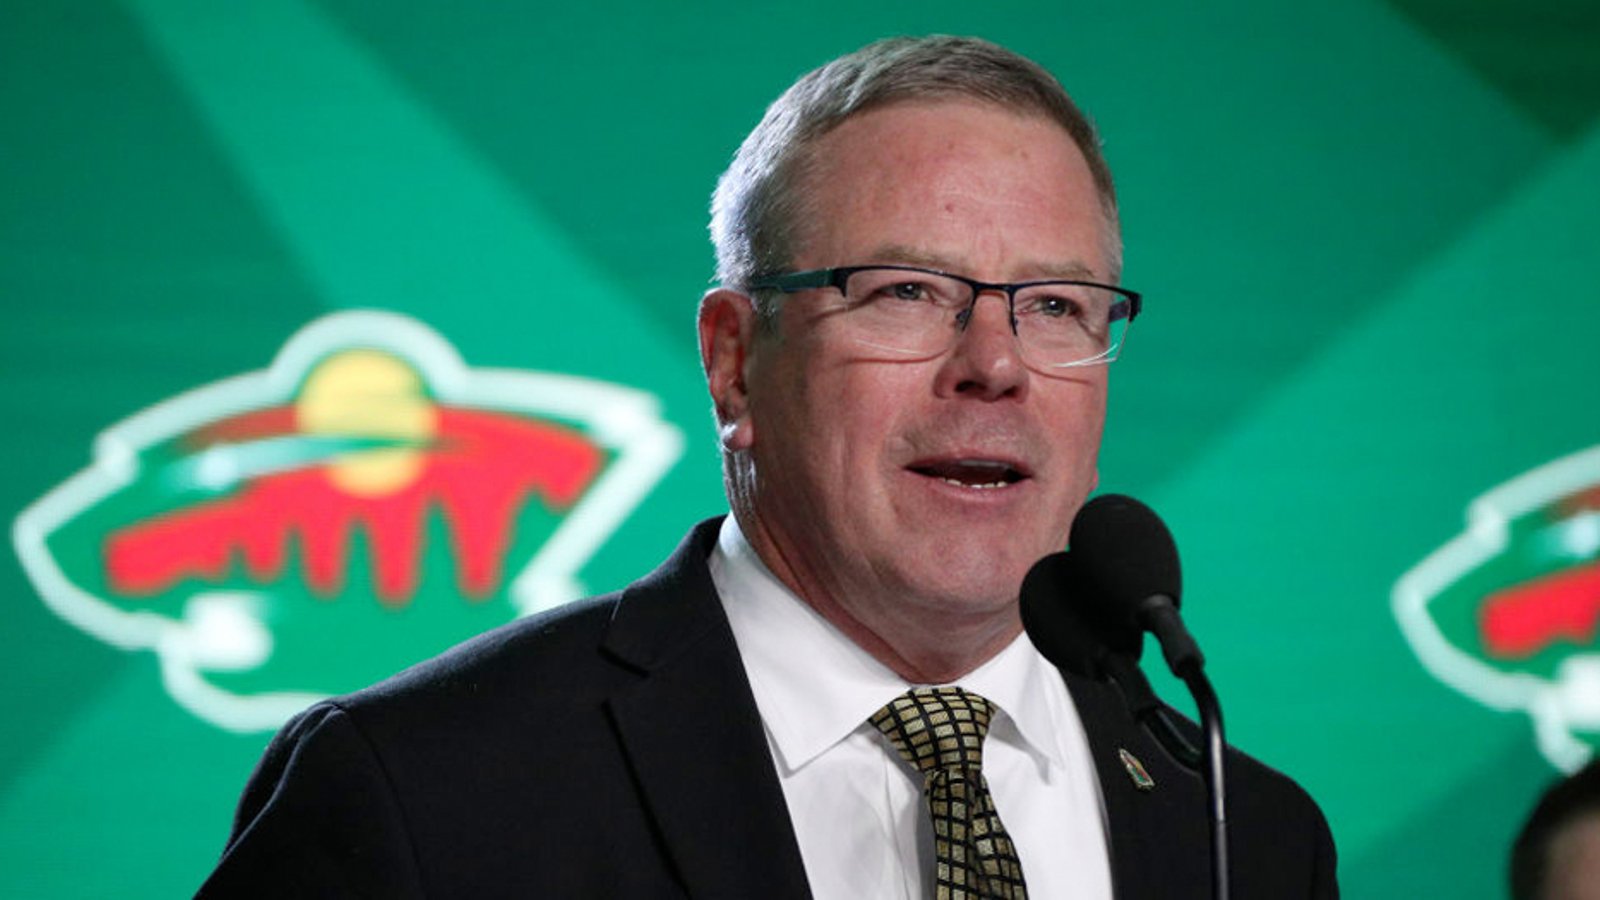 Disgraced former Wild GM Fenton is back in the NHL